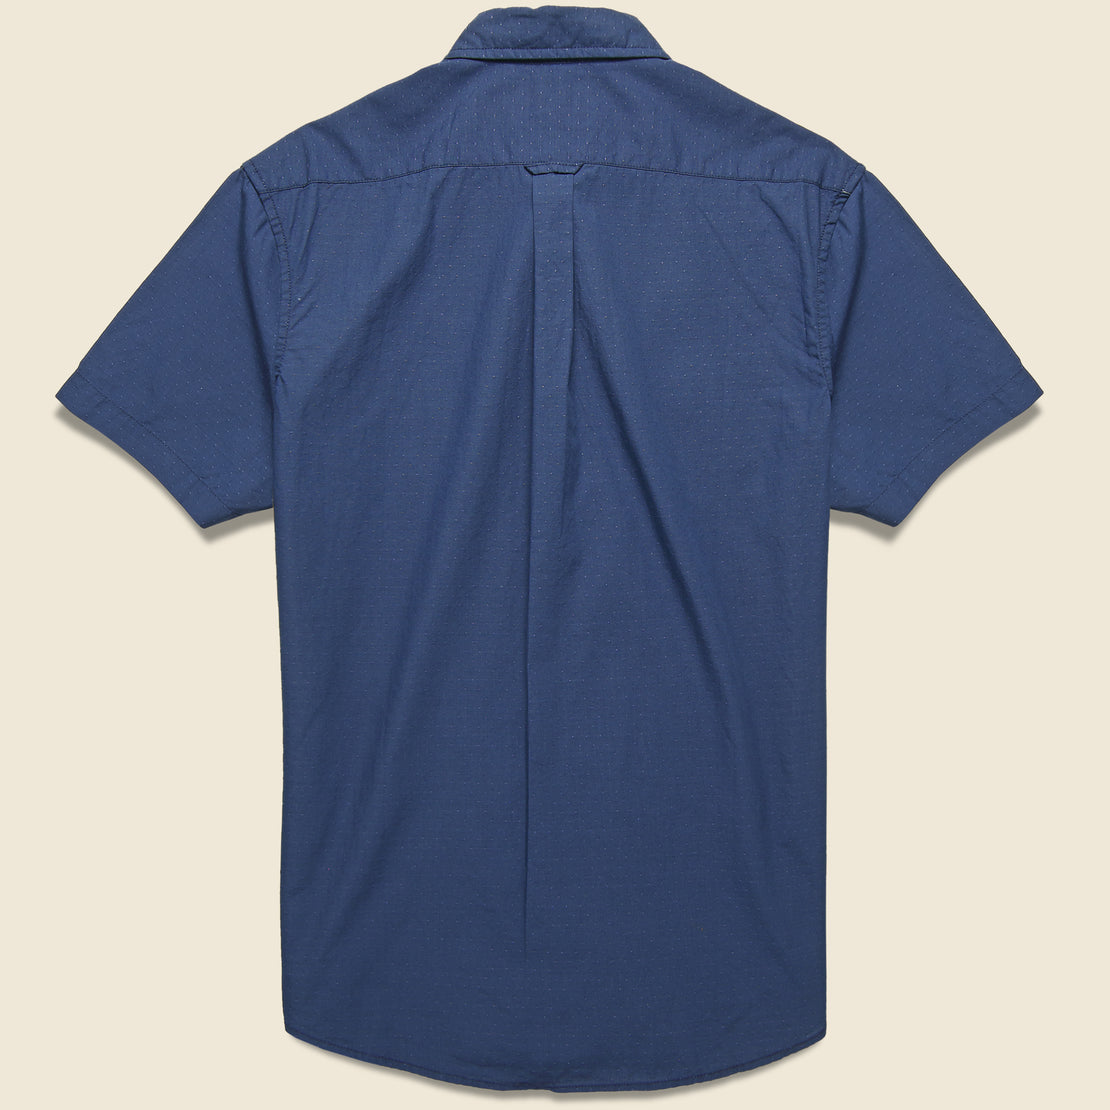 Townsend Dobby Shirt - Navy - Grayers - STAG Provisions - Tops - S/S Woven - Solid